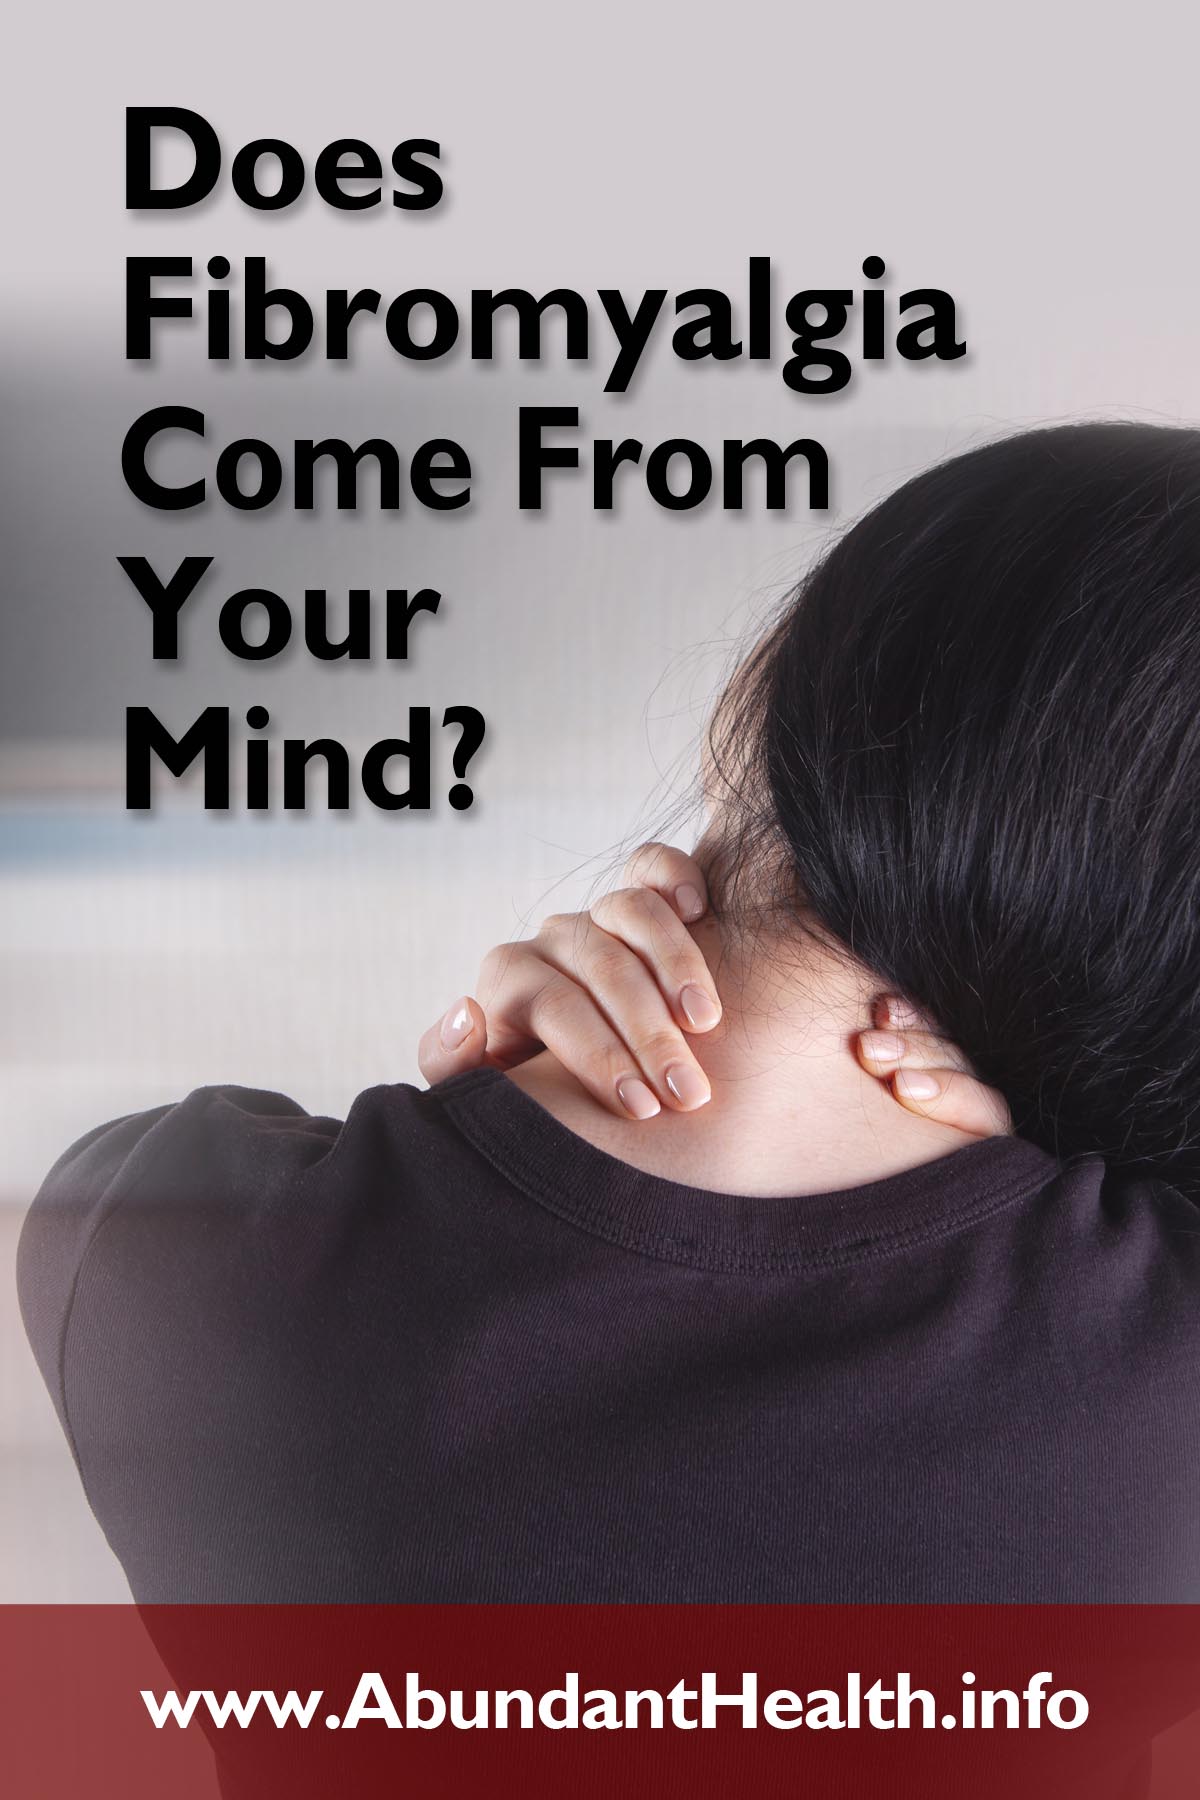 Does Fibromyalgia Come From Your Mind?